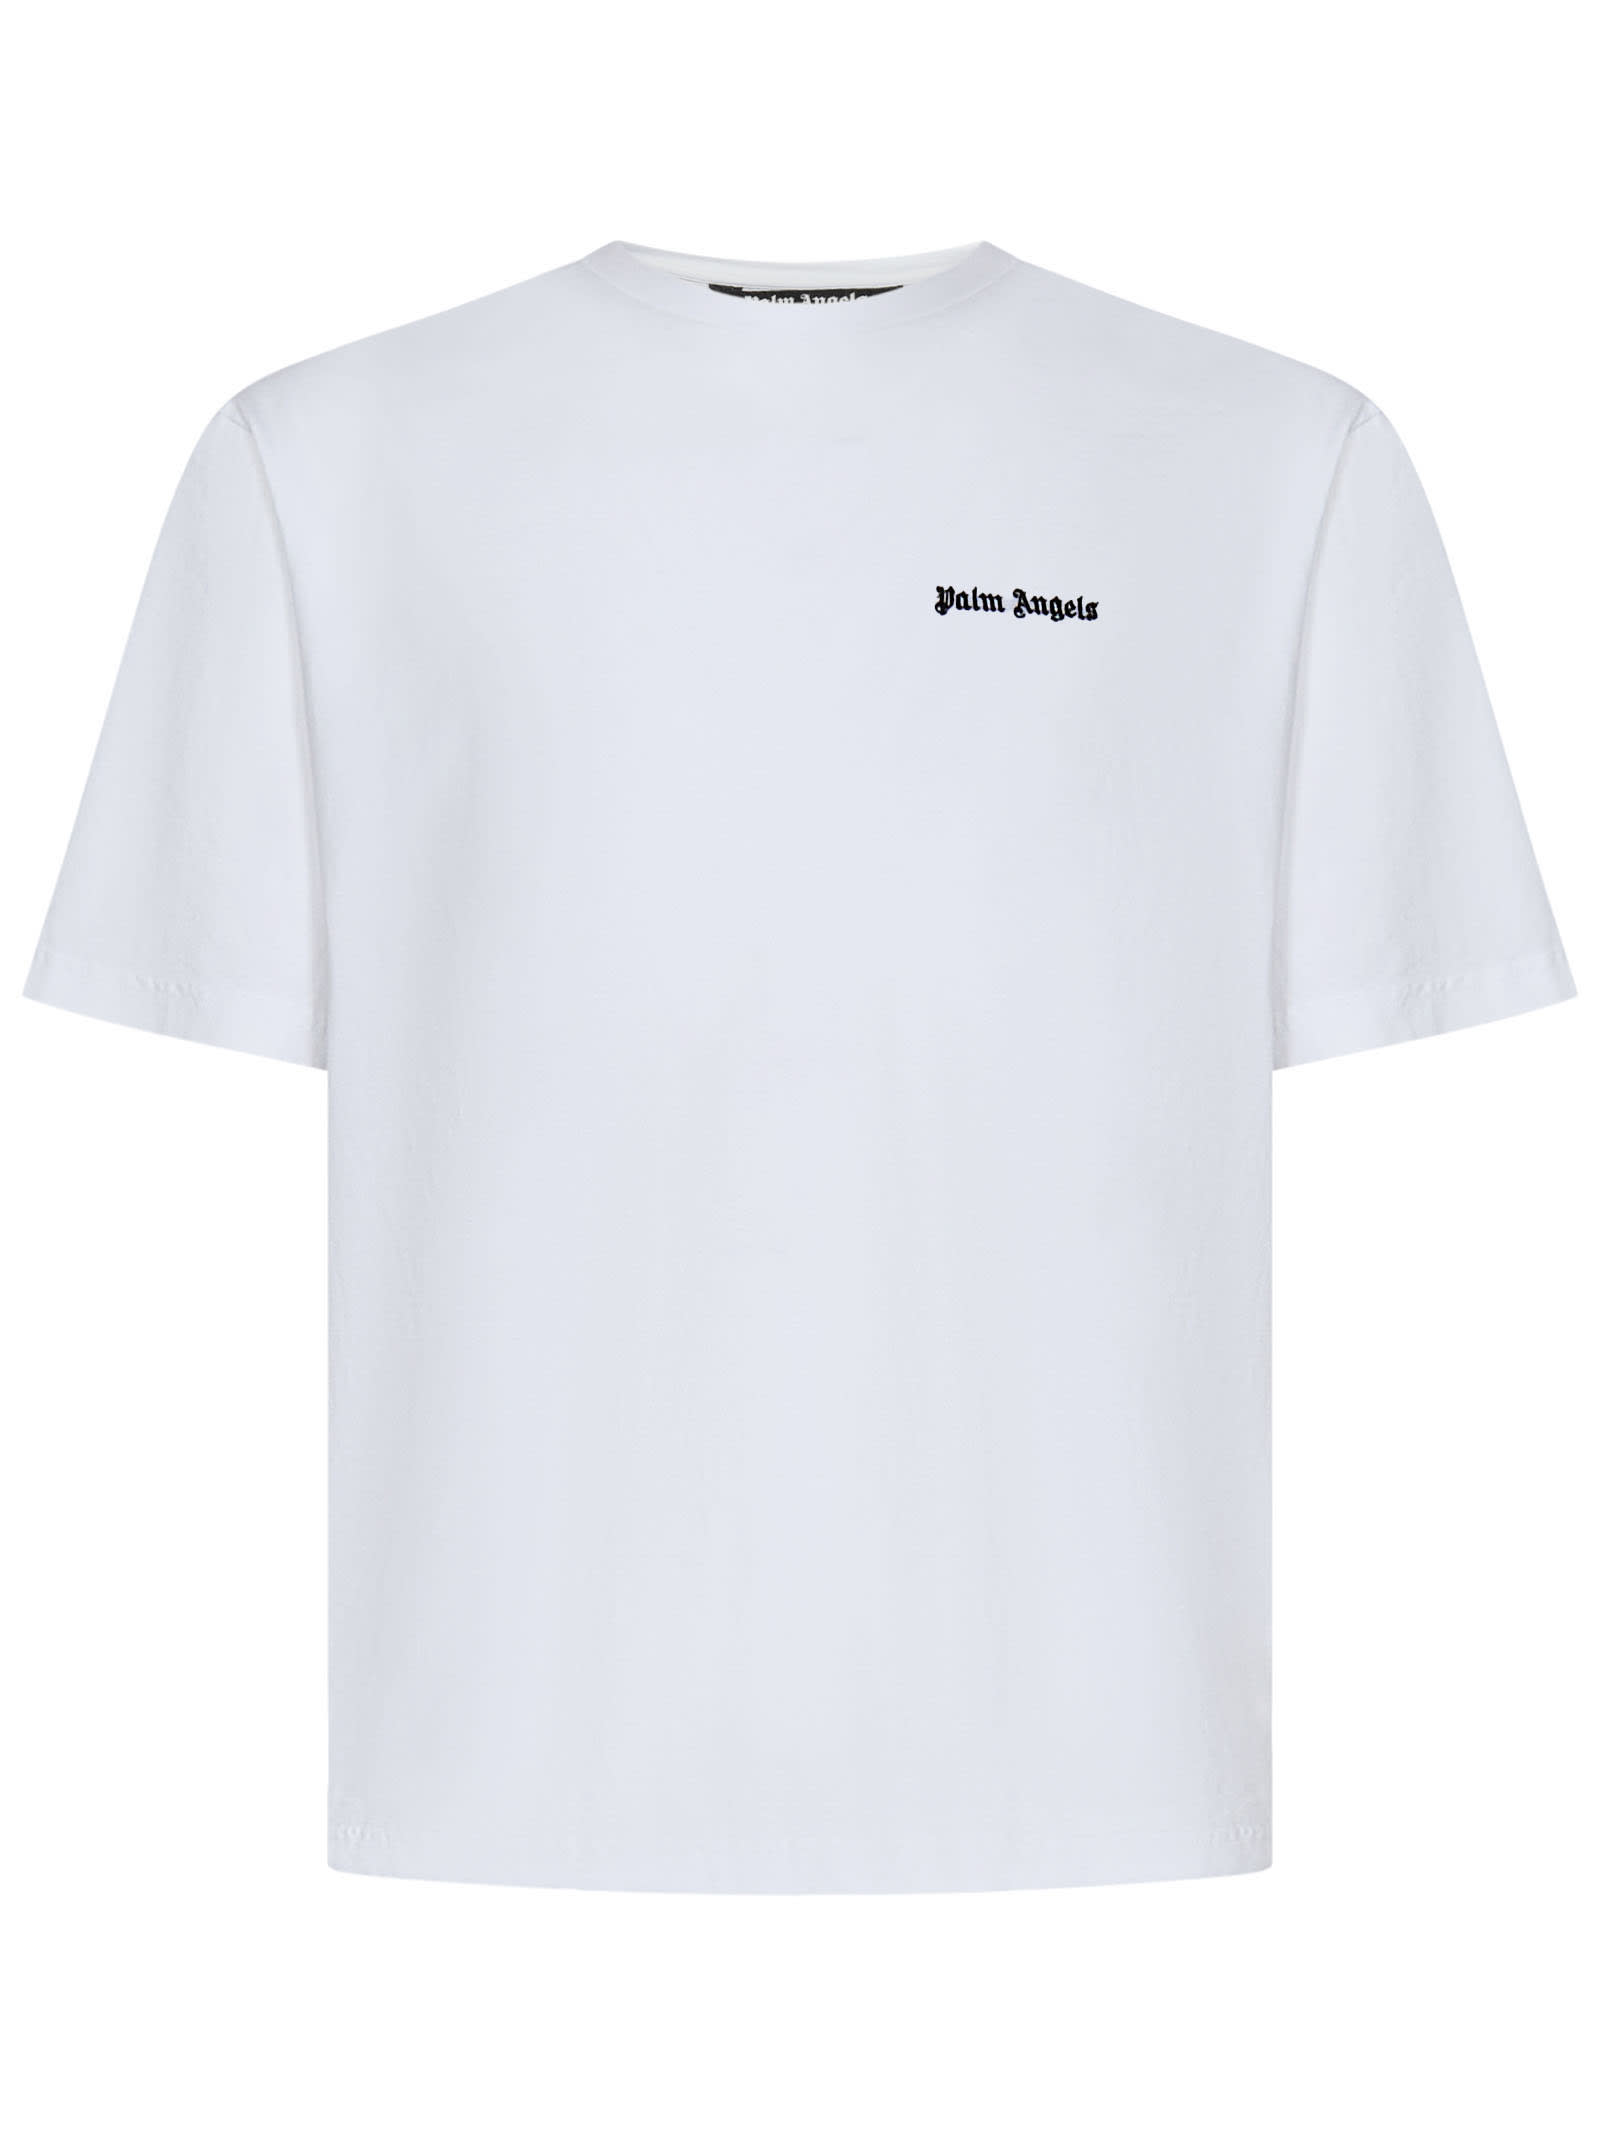 PALM ANGELS EMBROIDERED LOGO T-SHIRT